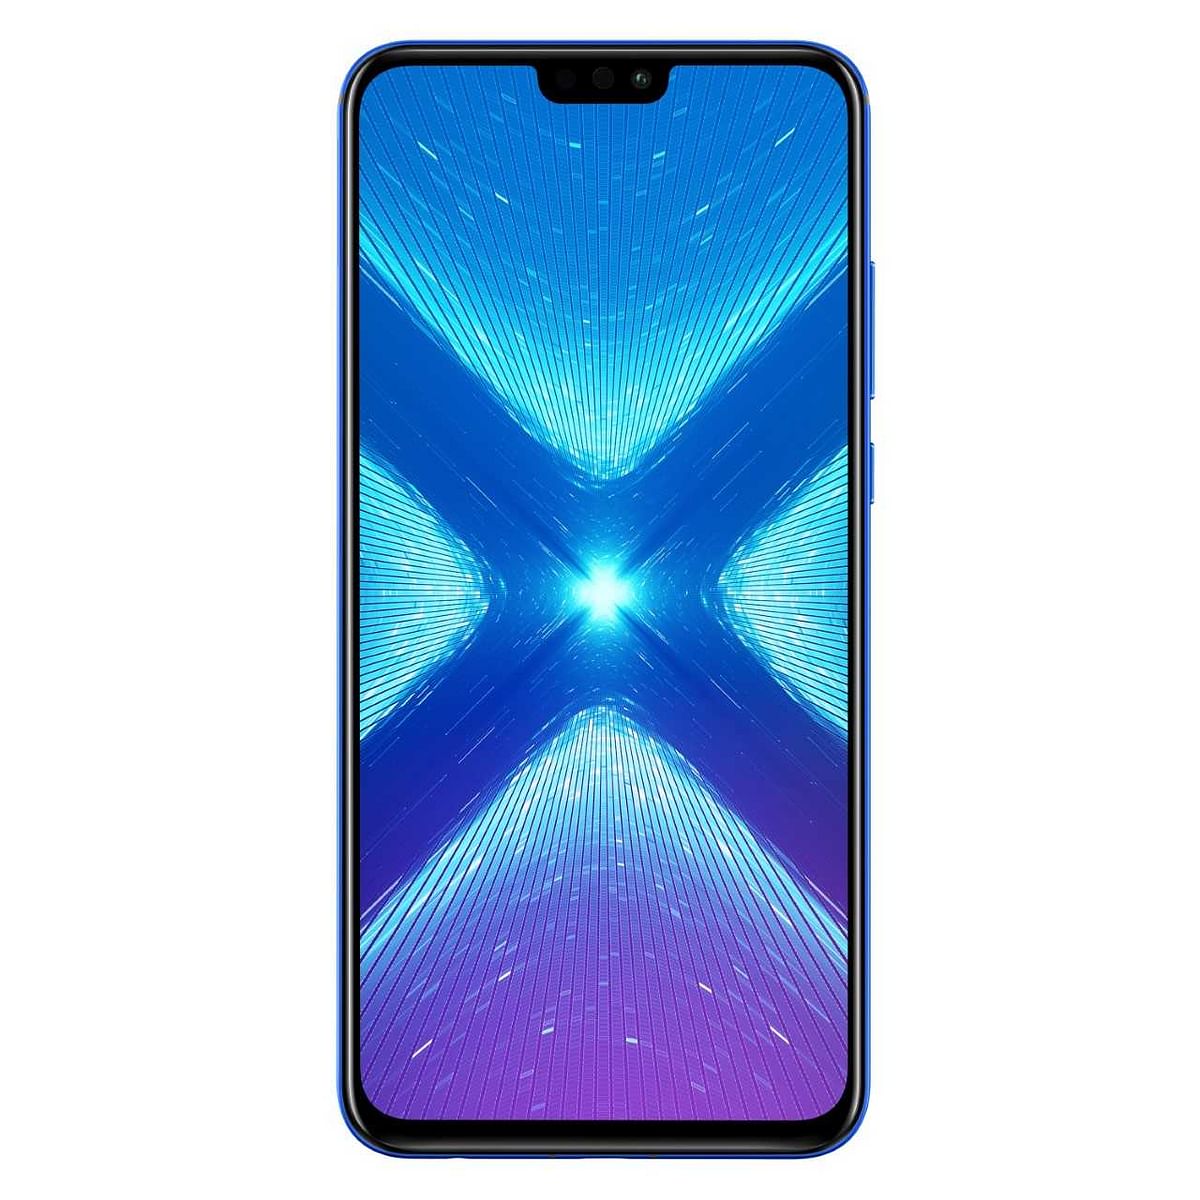  If it’s performance, it has gotta be Honor 8X.